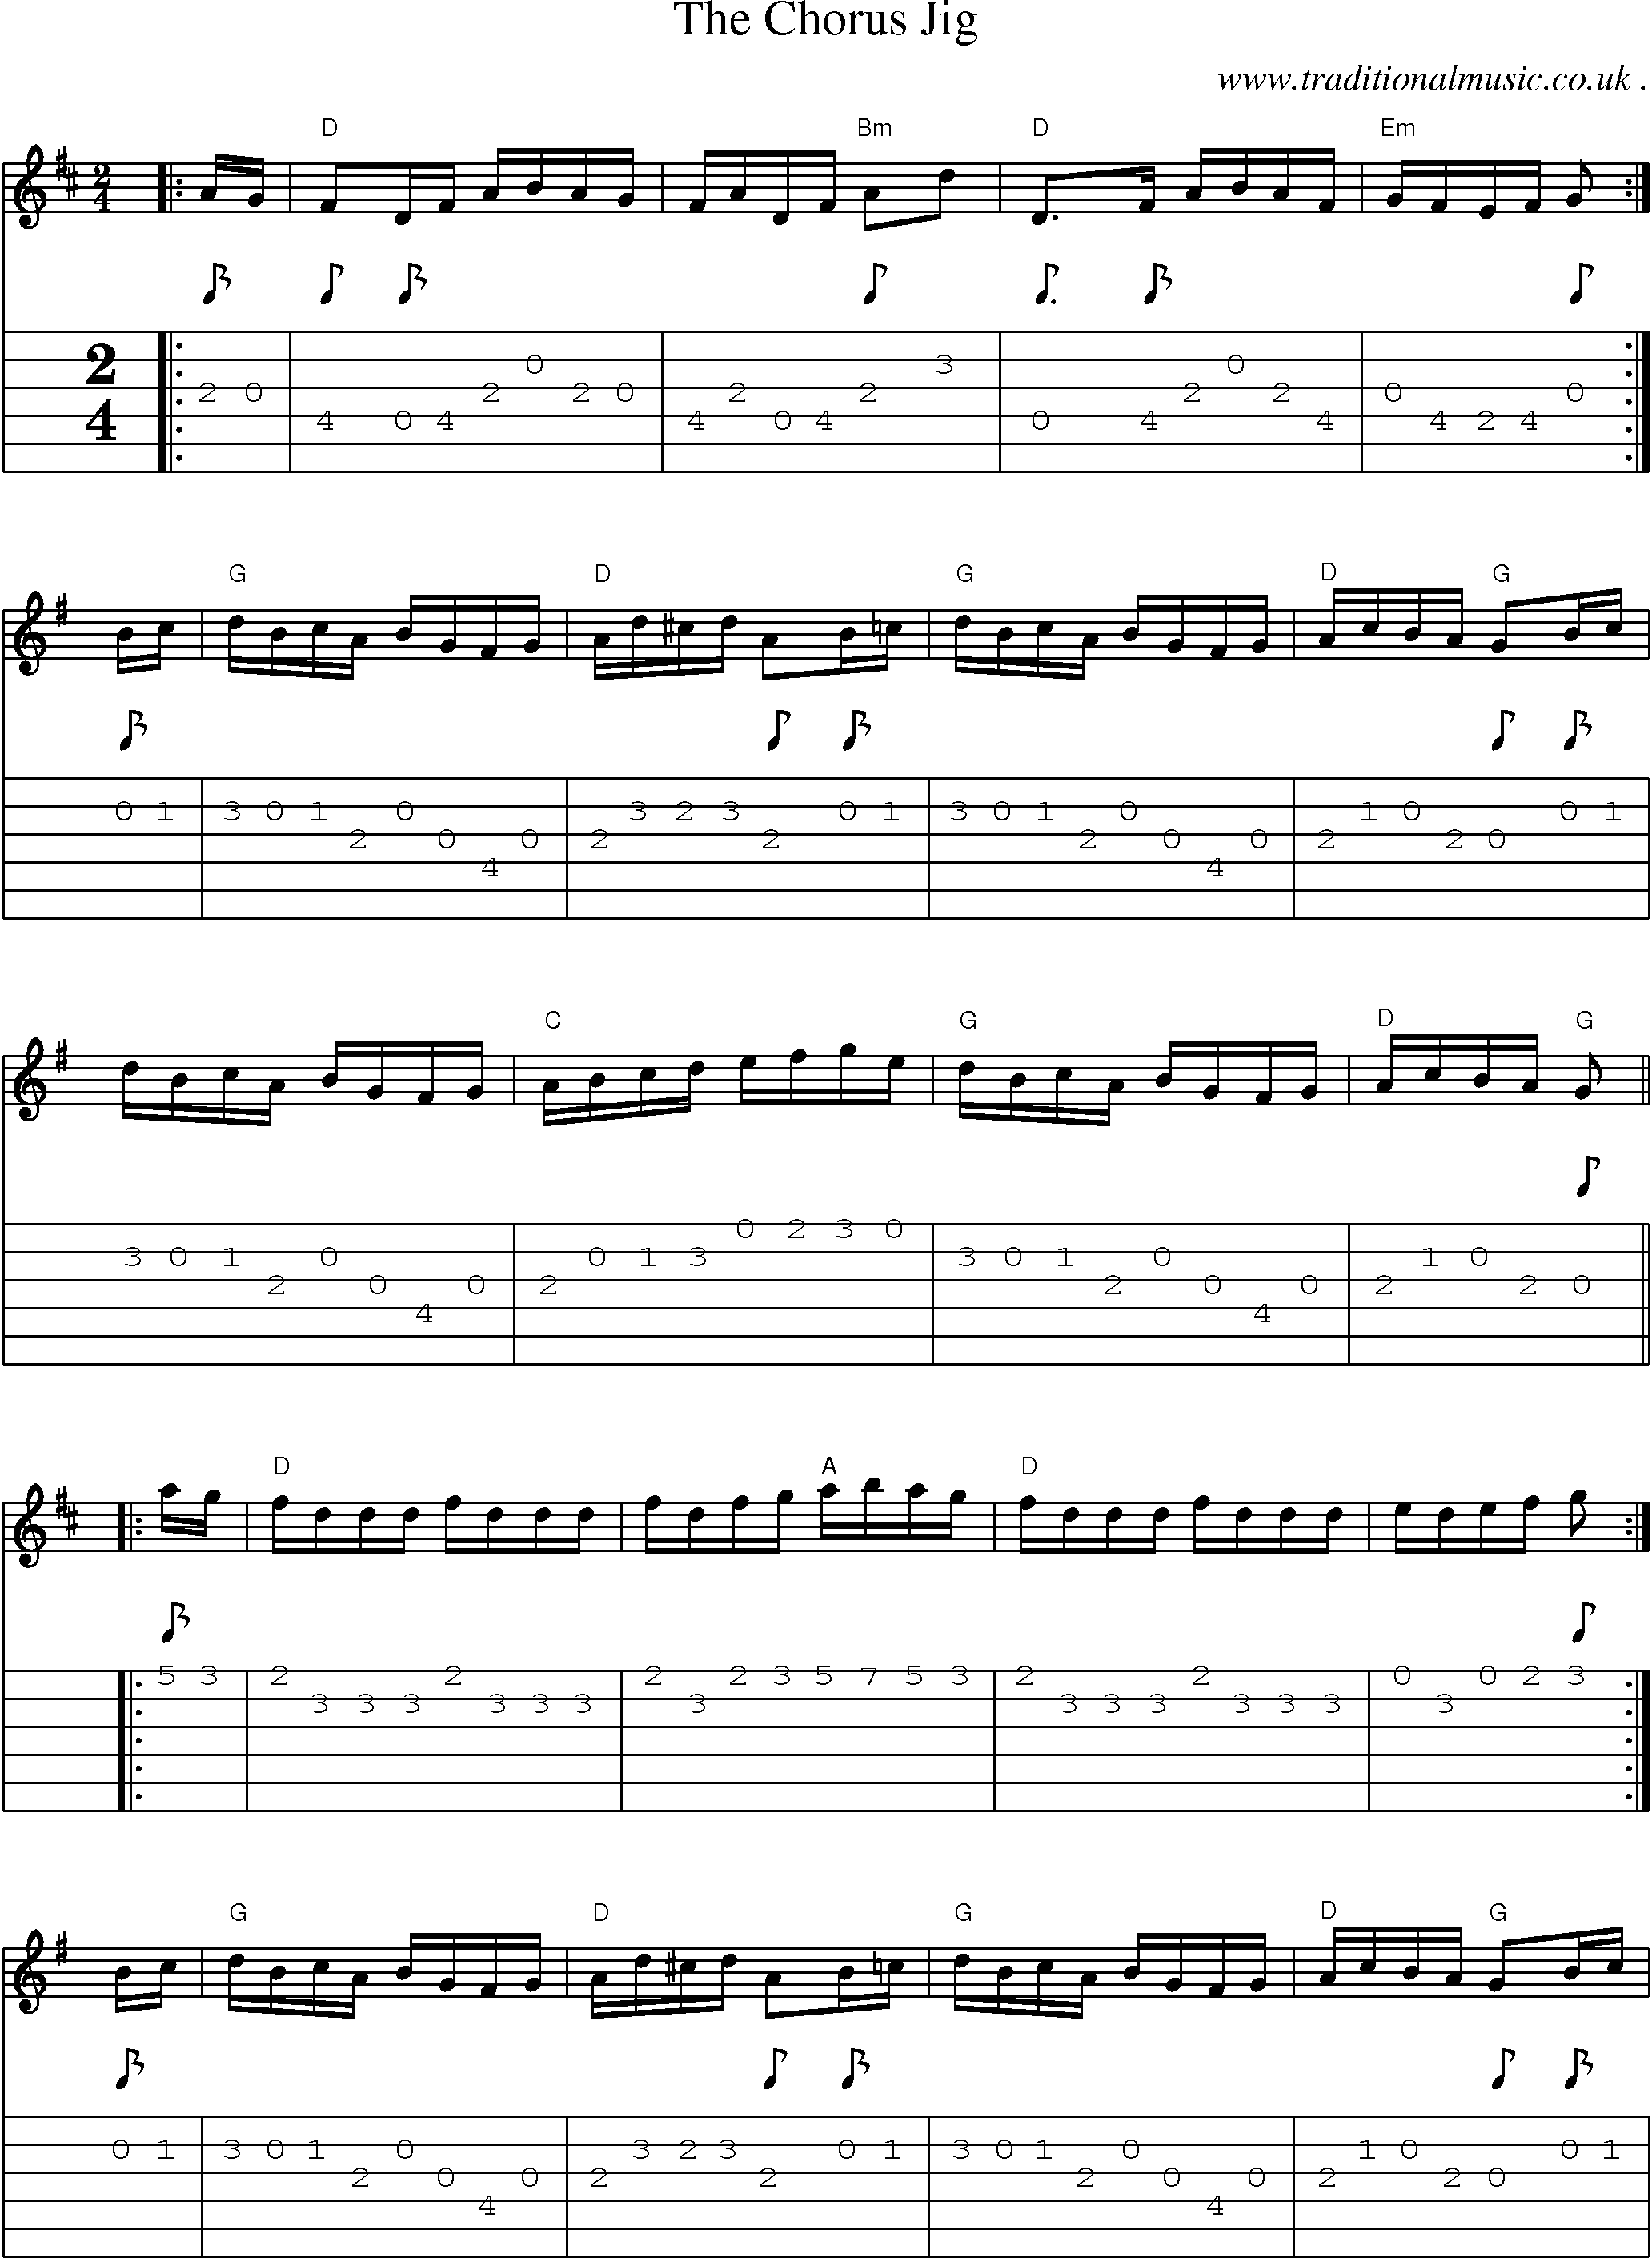 Music Score and Guitar Tabs for The Chorus Jig